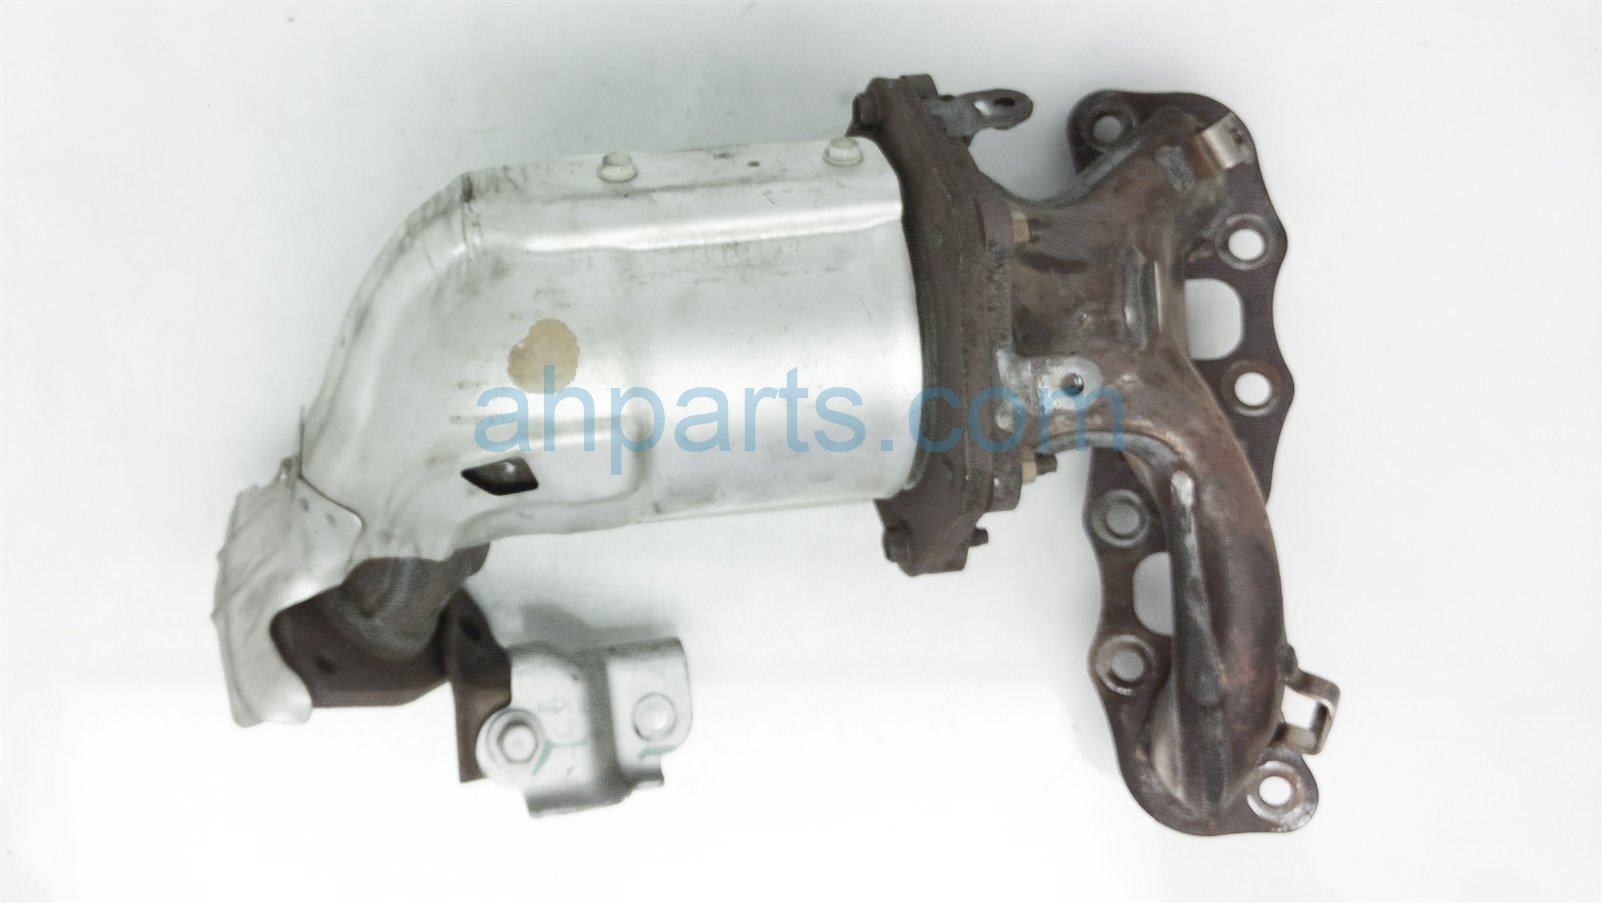 $199 Nissan FRONT EXHAUST MANIFOLD